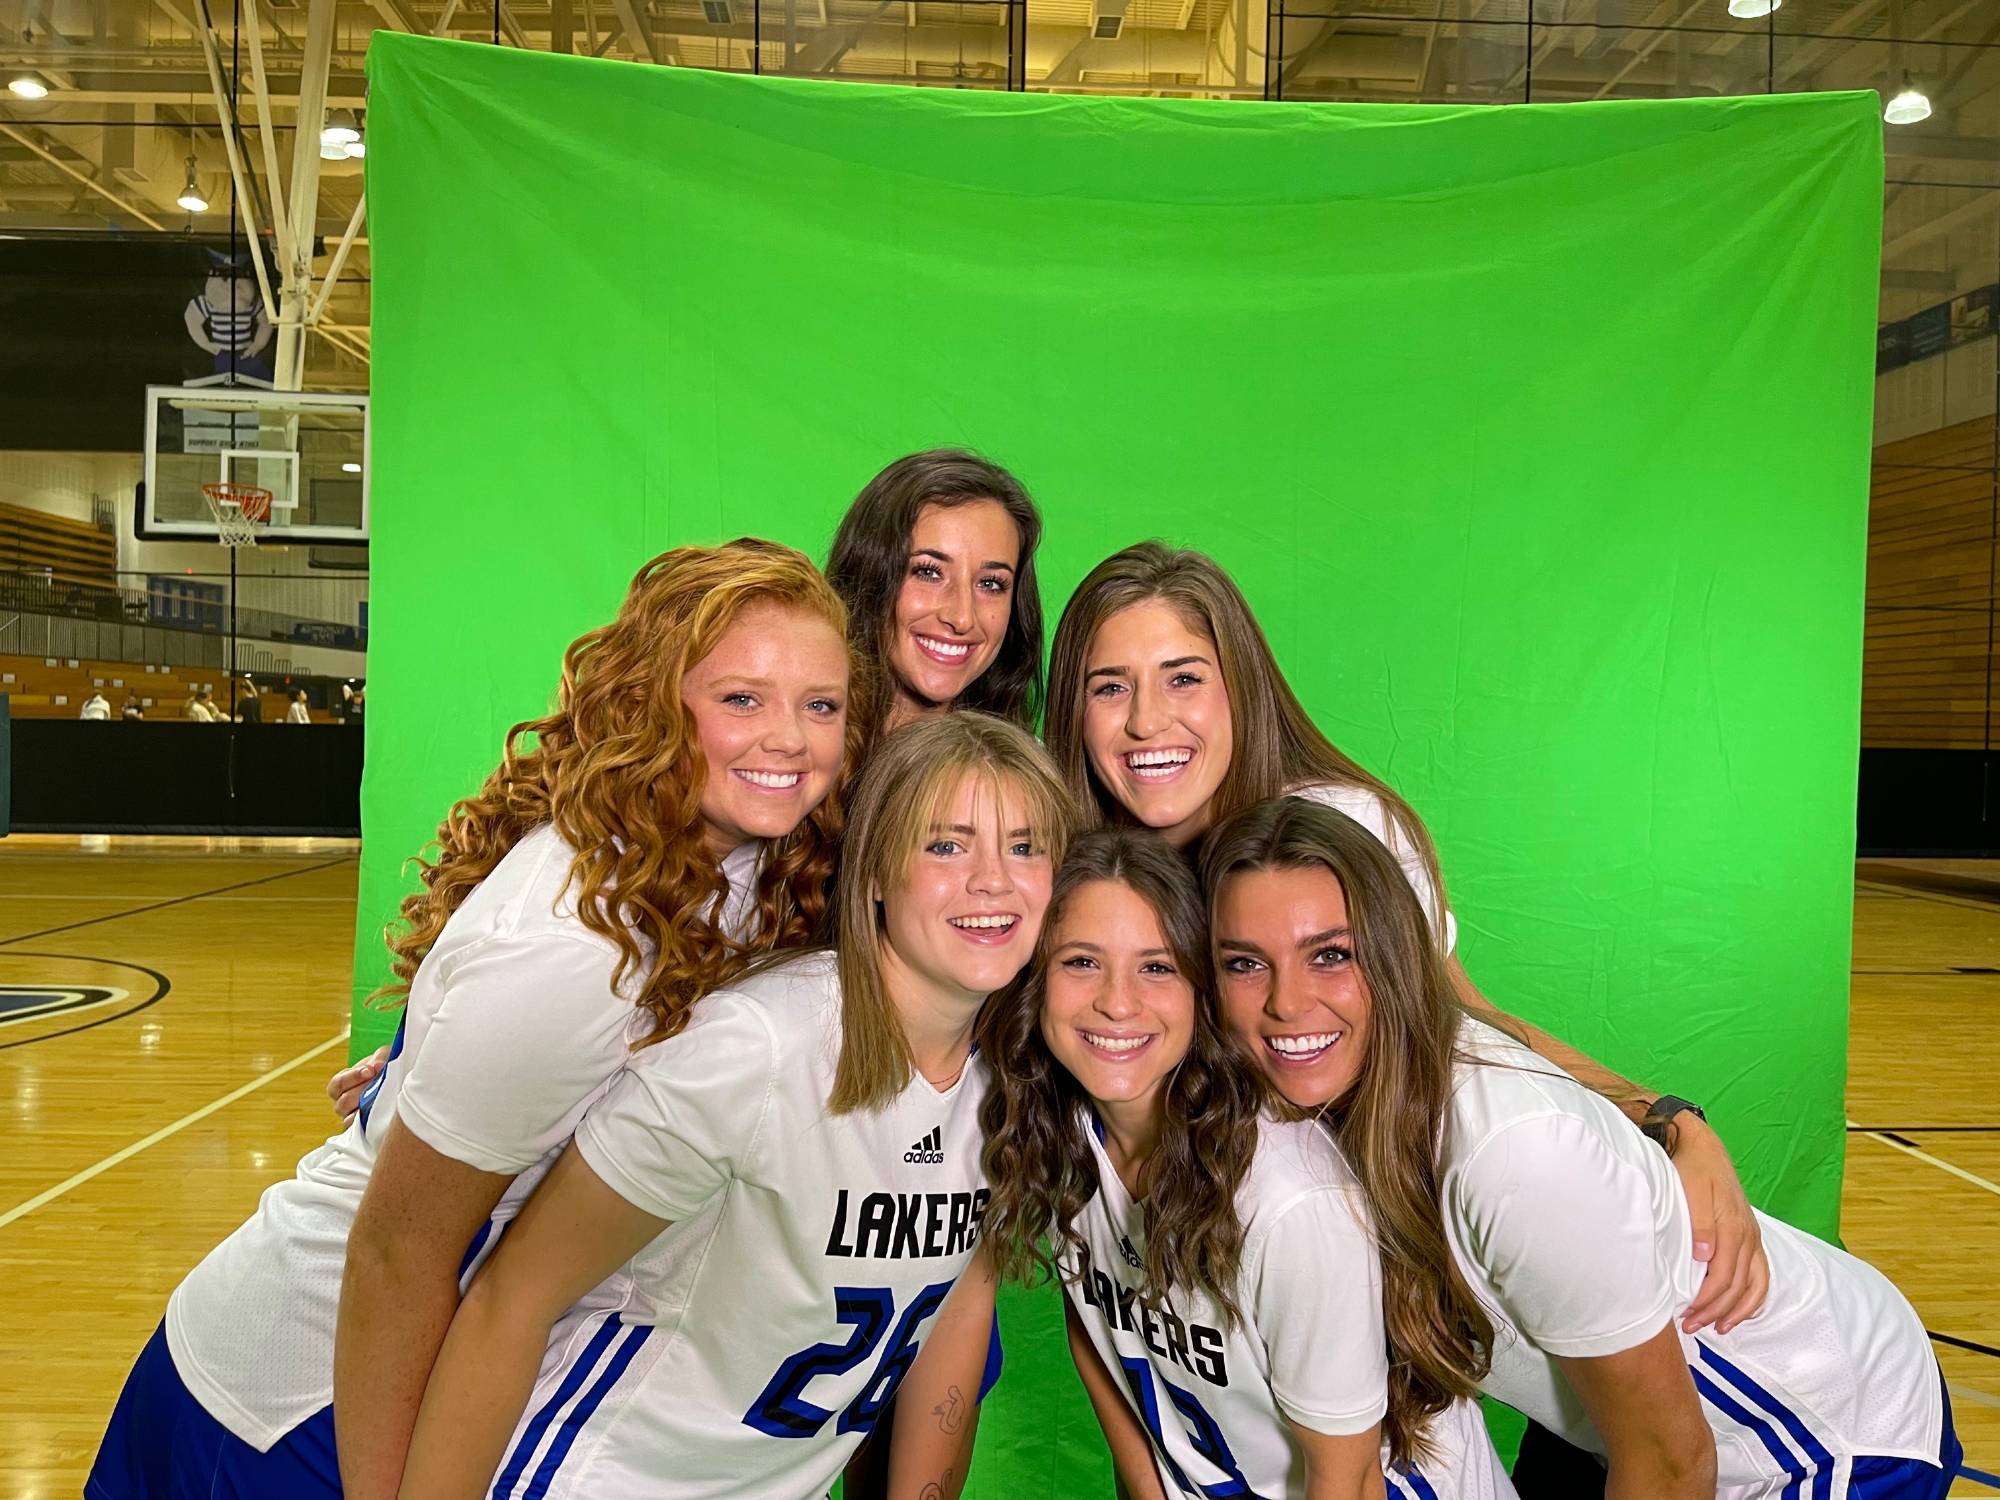 Senior class of 2022, women's lacrosse, group photo from media day